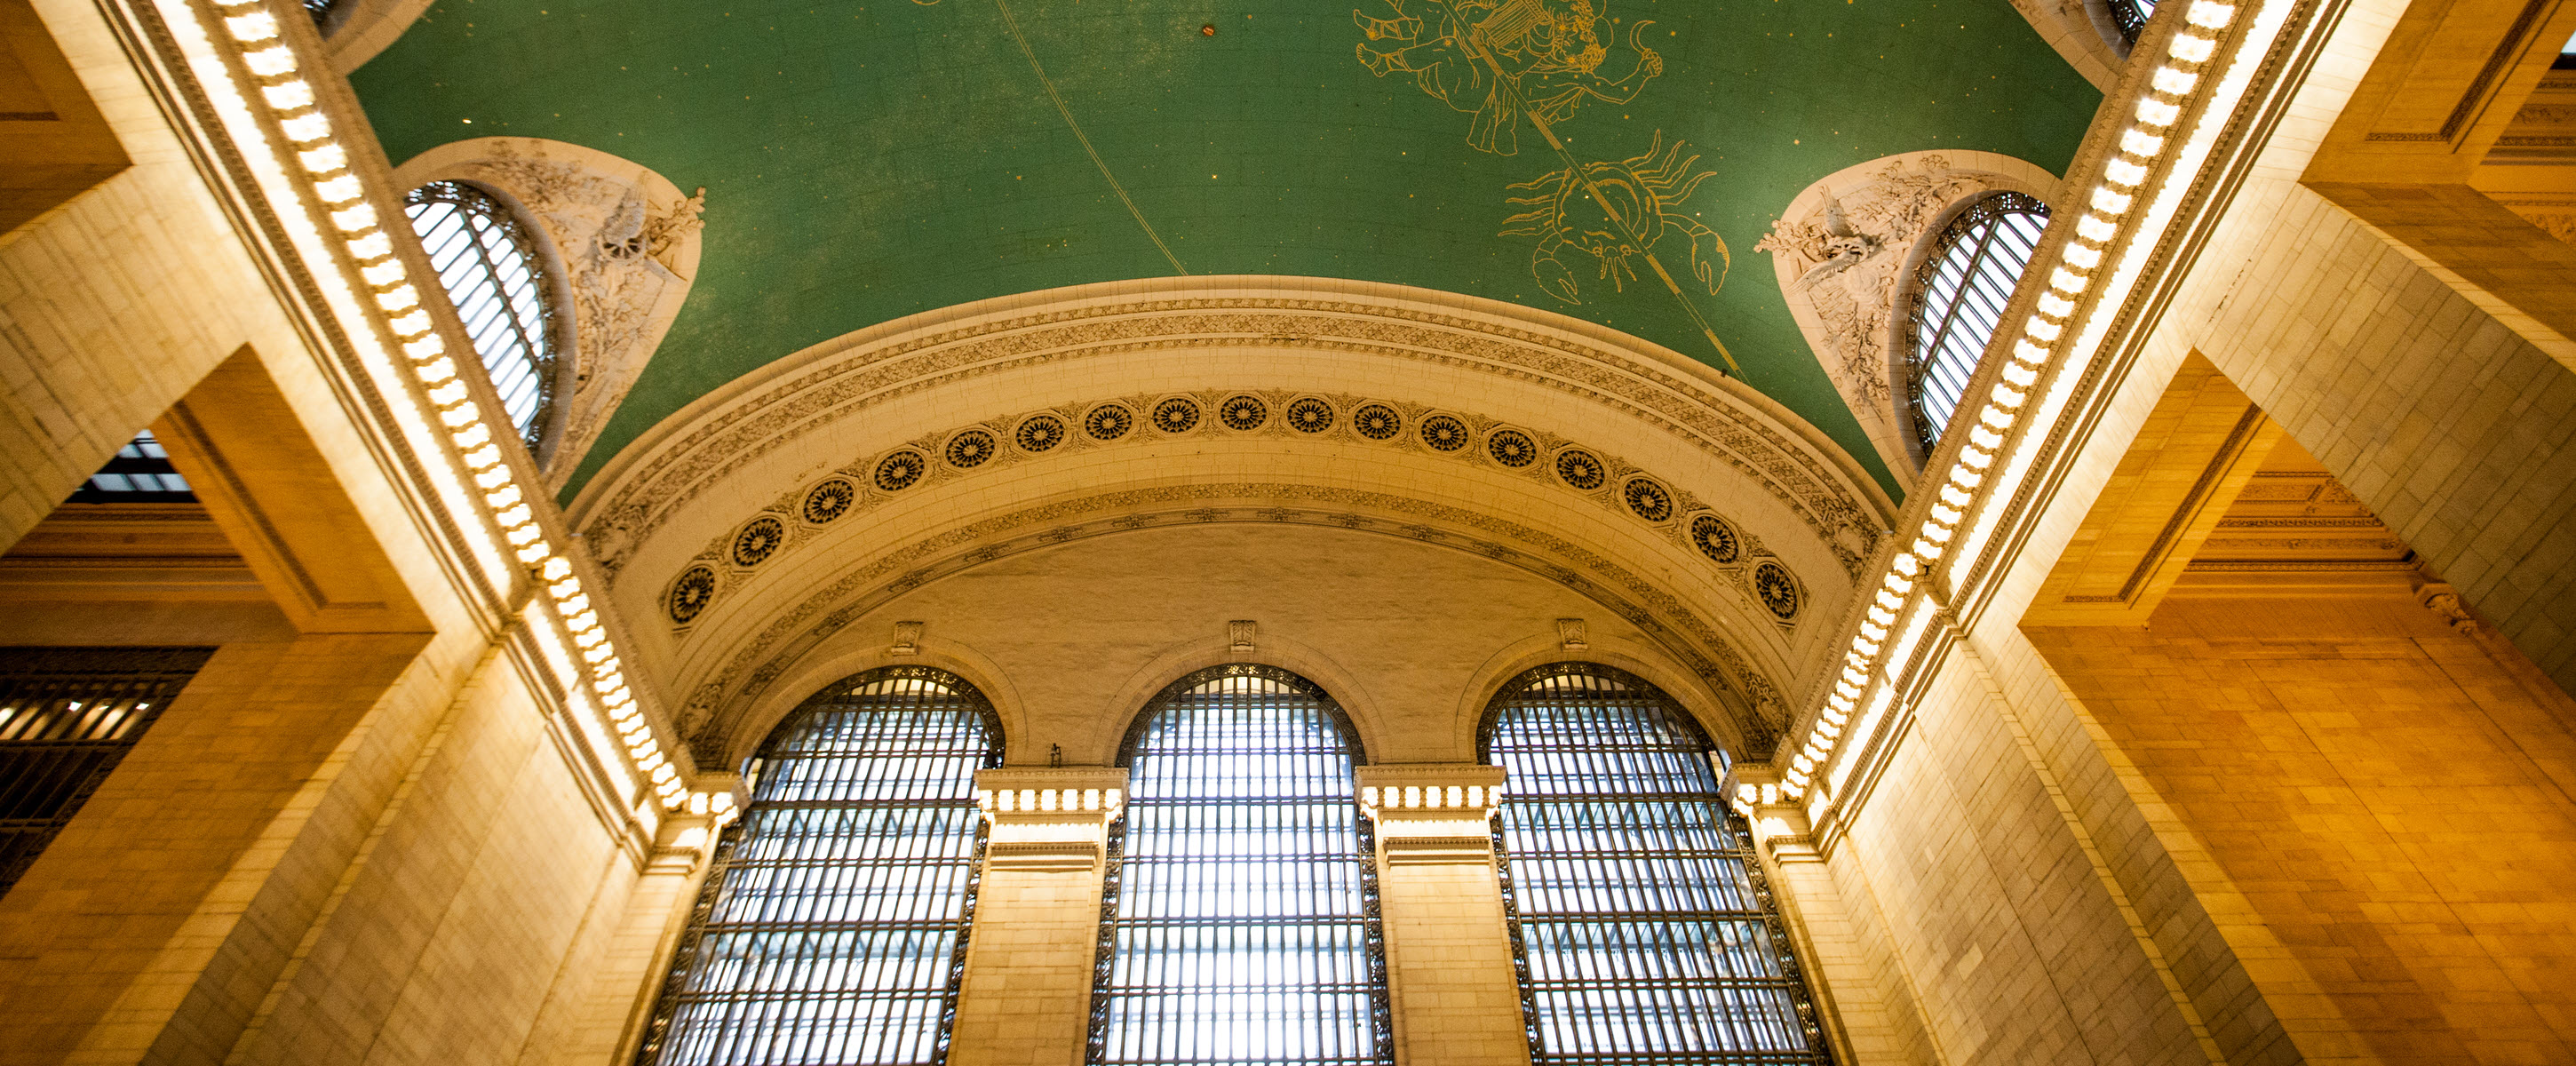 Green Ceiling with Gold Designs in Grand Central Station 